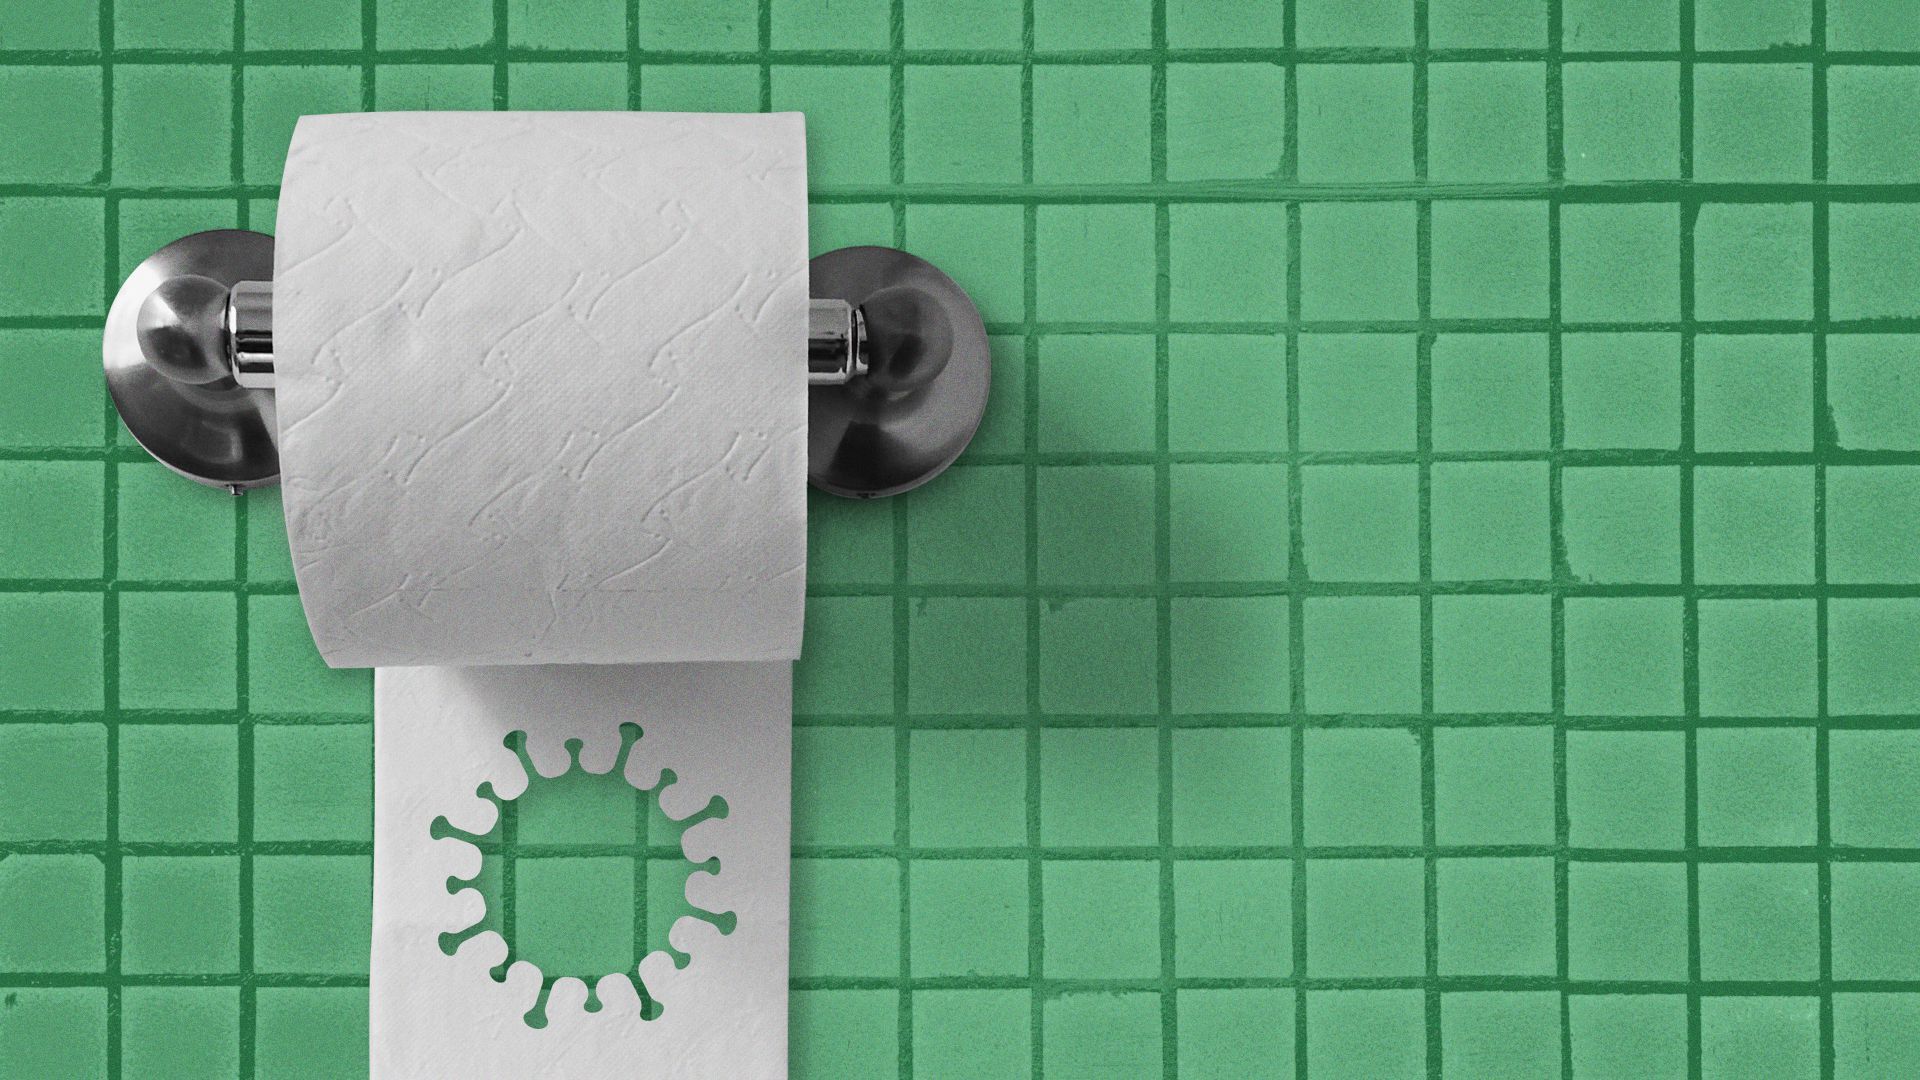 Tiled wall with a COVID cell cut into a sheet of toilet paper on the roll.